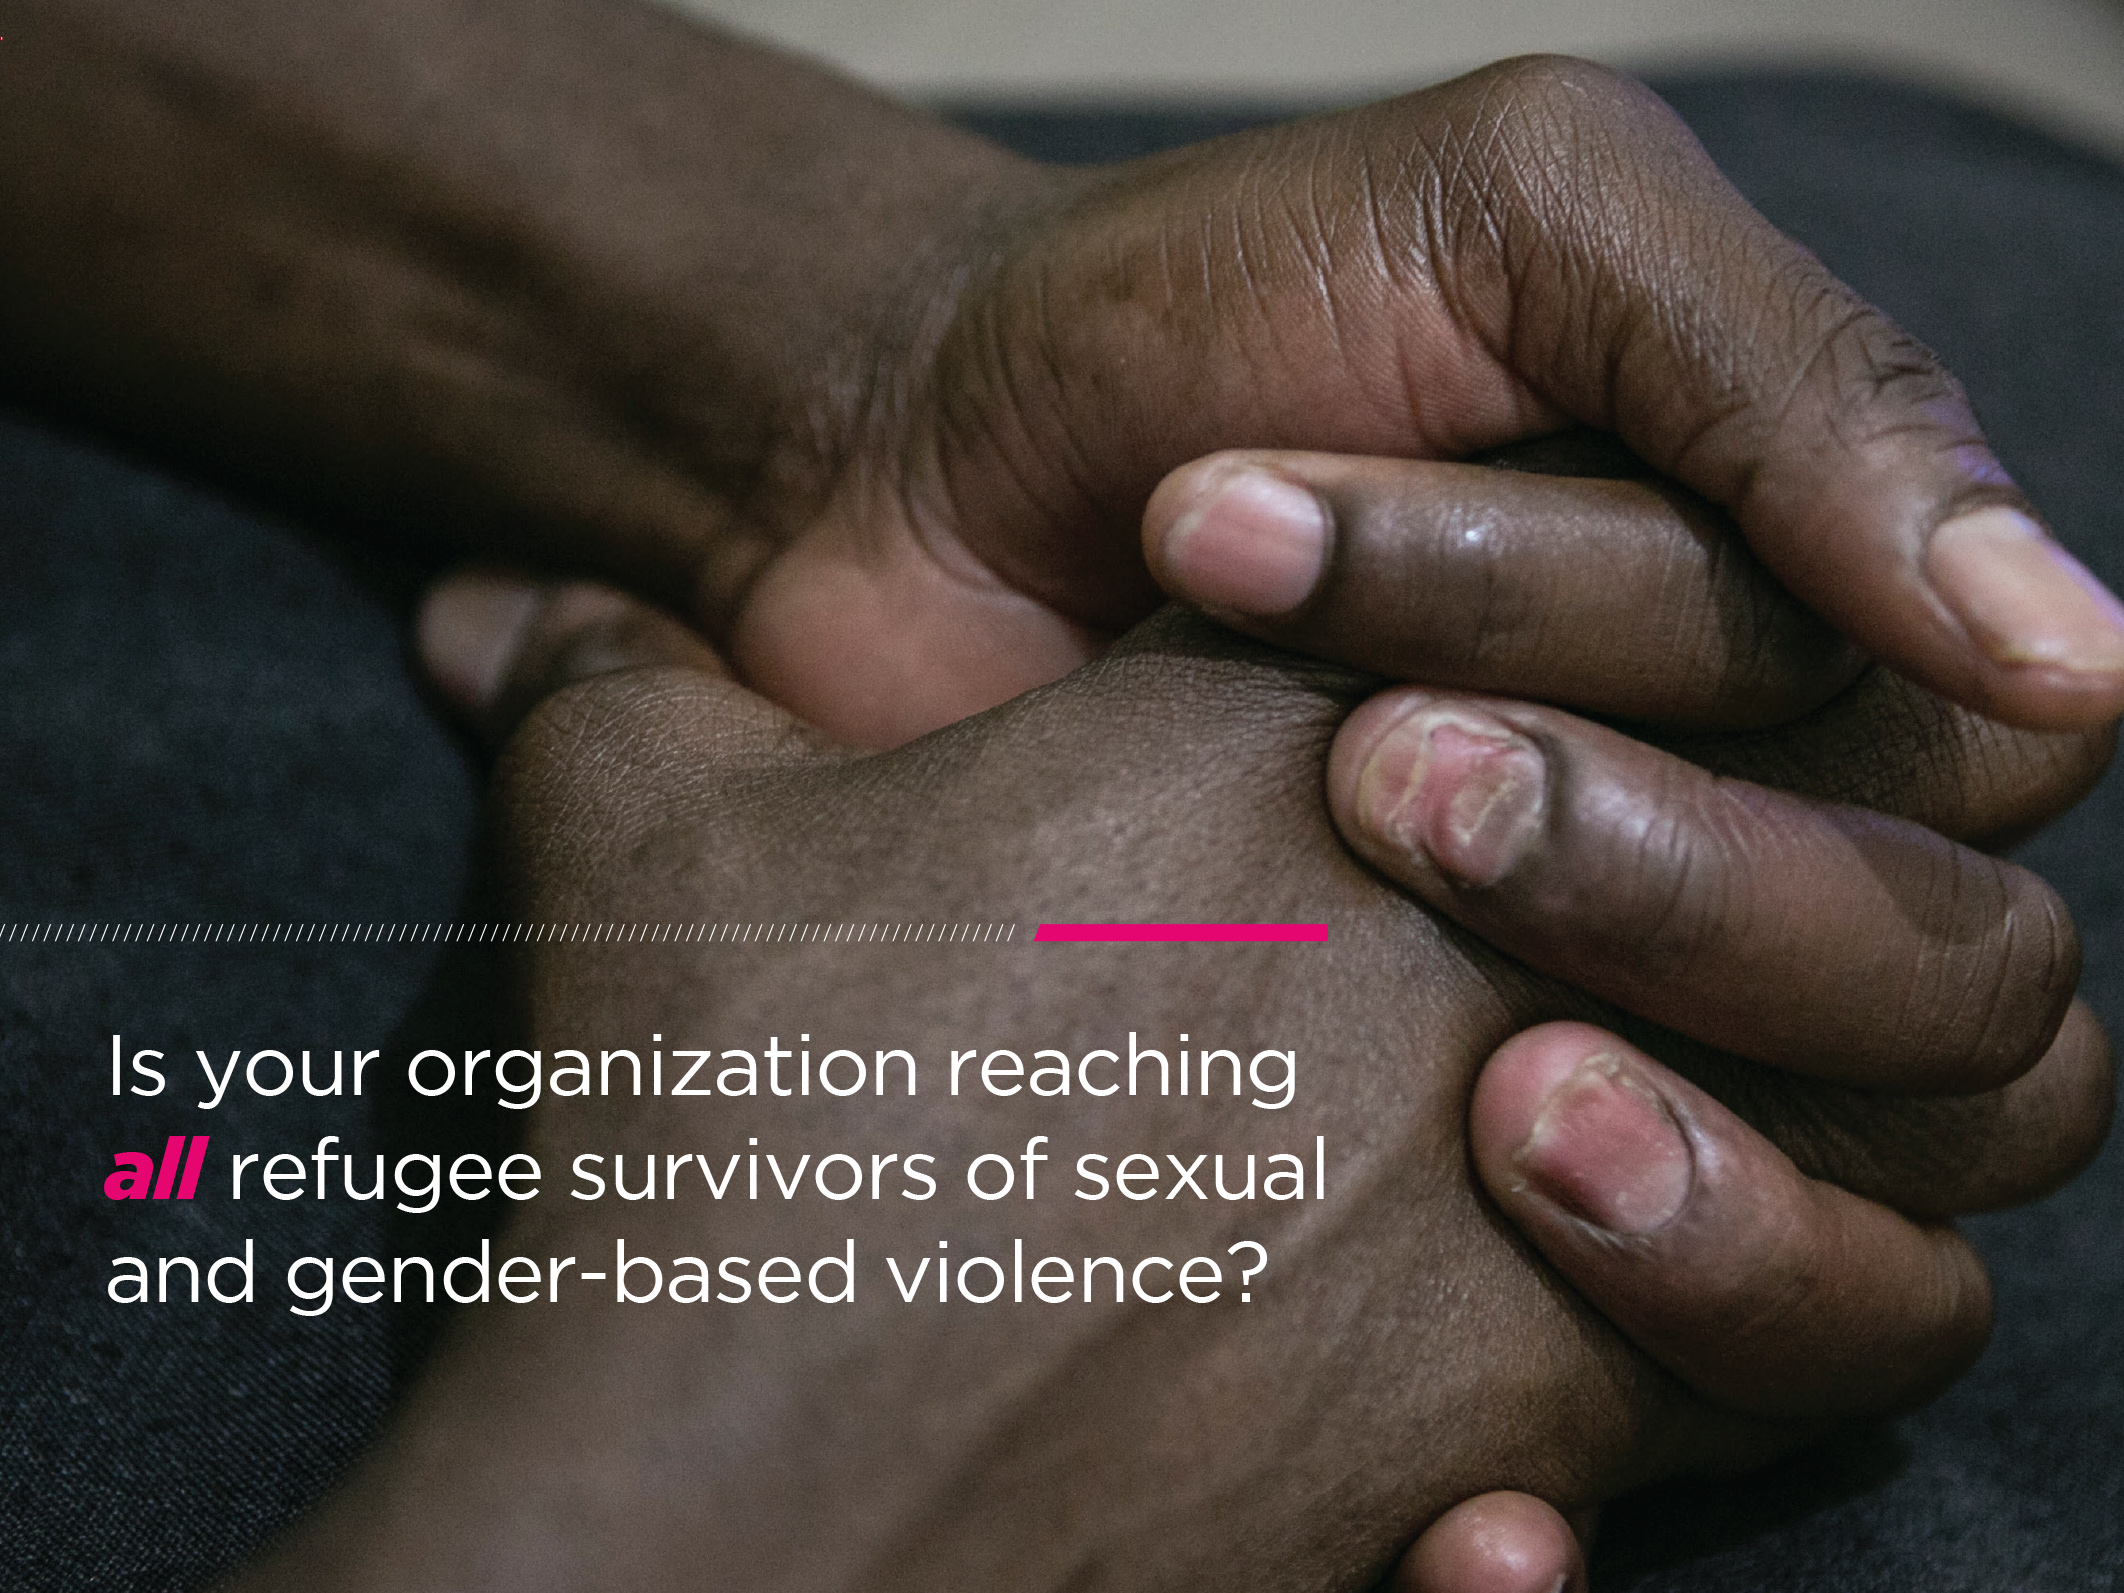 Protecting Refugee Survivors of Sexual and Gender Based Violence